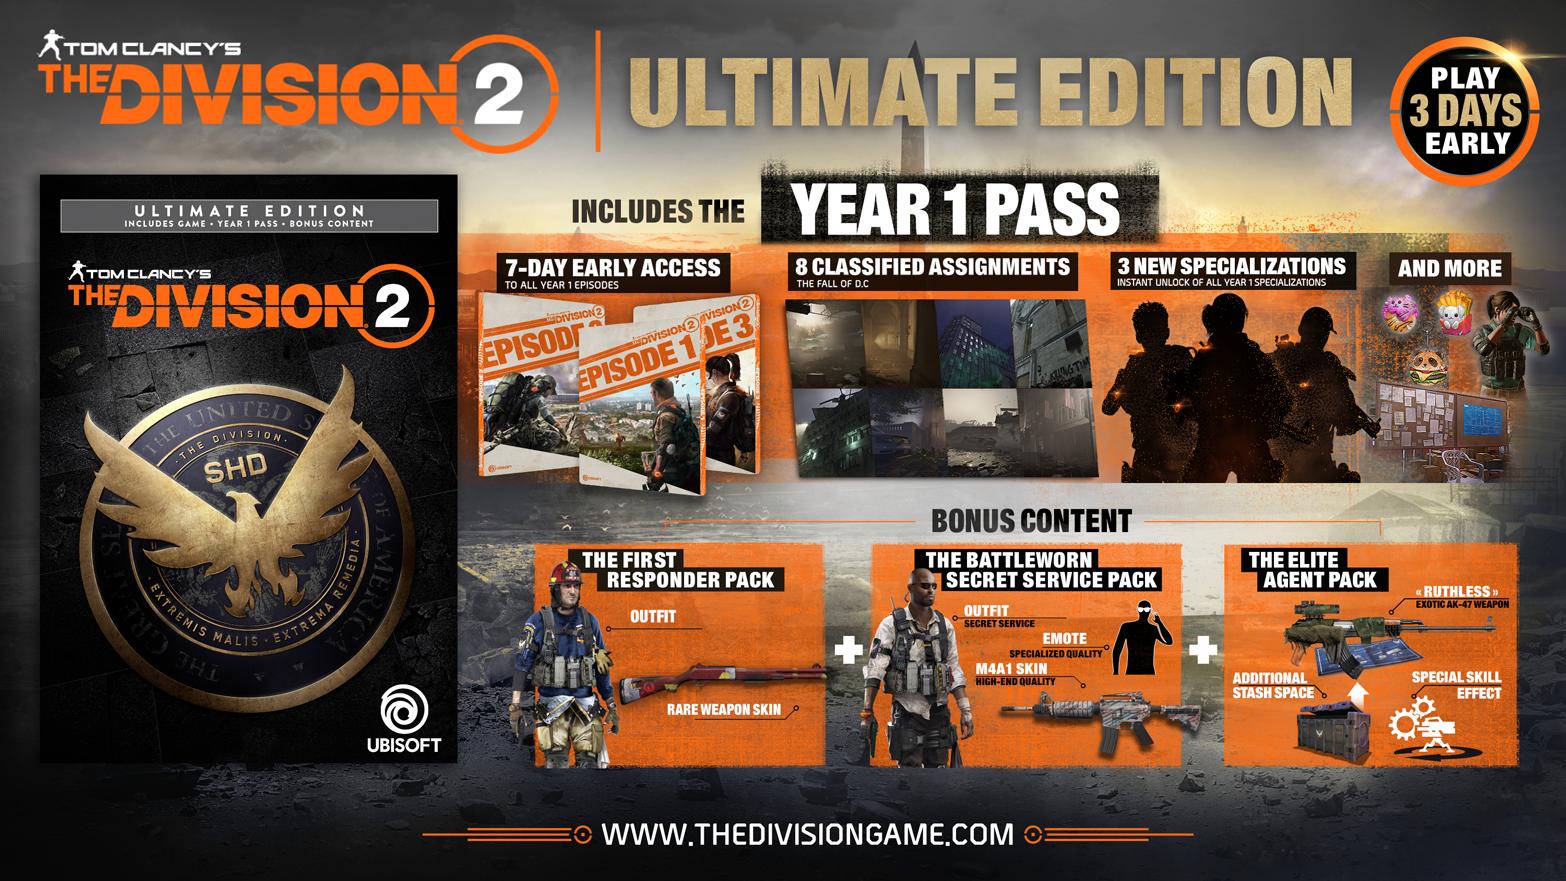 The Division 2 Thank You All For Playing Our Open Beta Over The Weekend To Get Your Hands On The Game 3 Days Early Then Make Sure You Order The